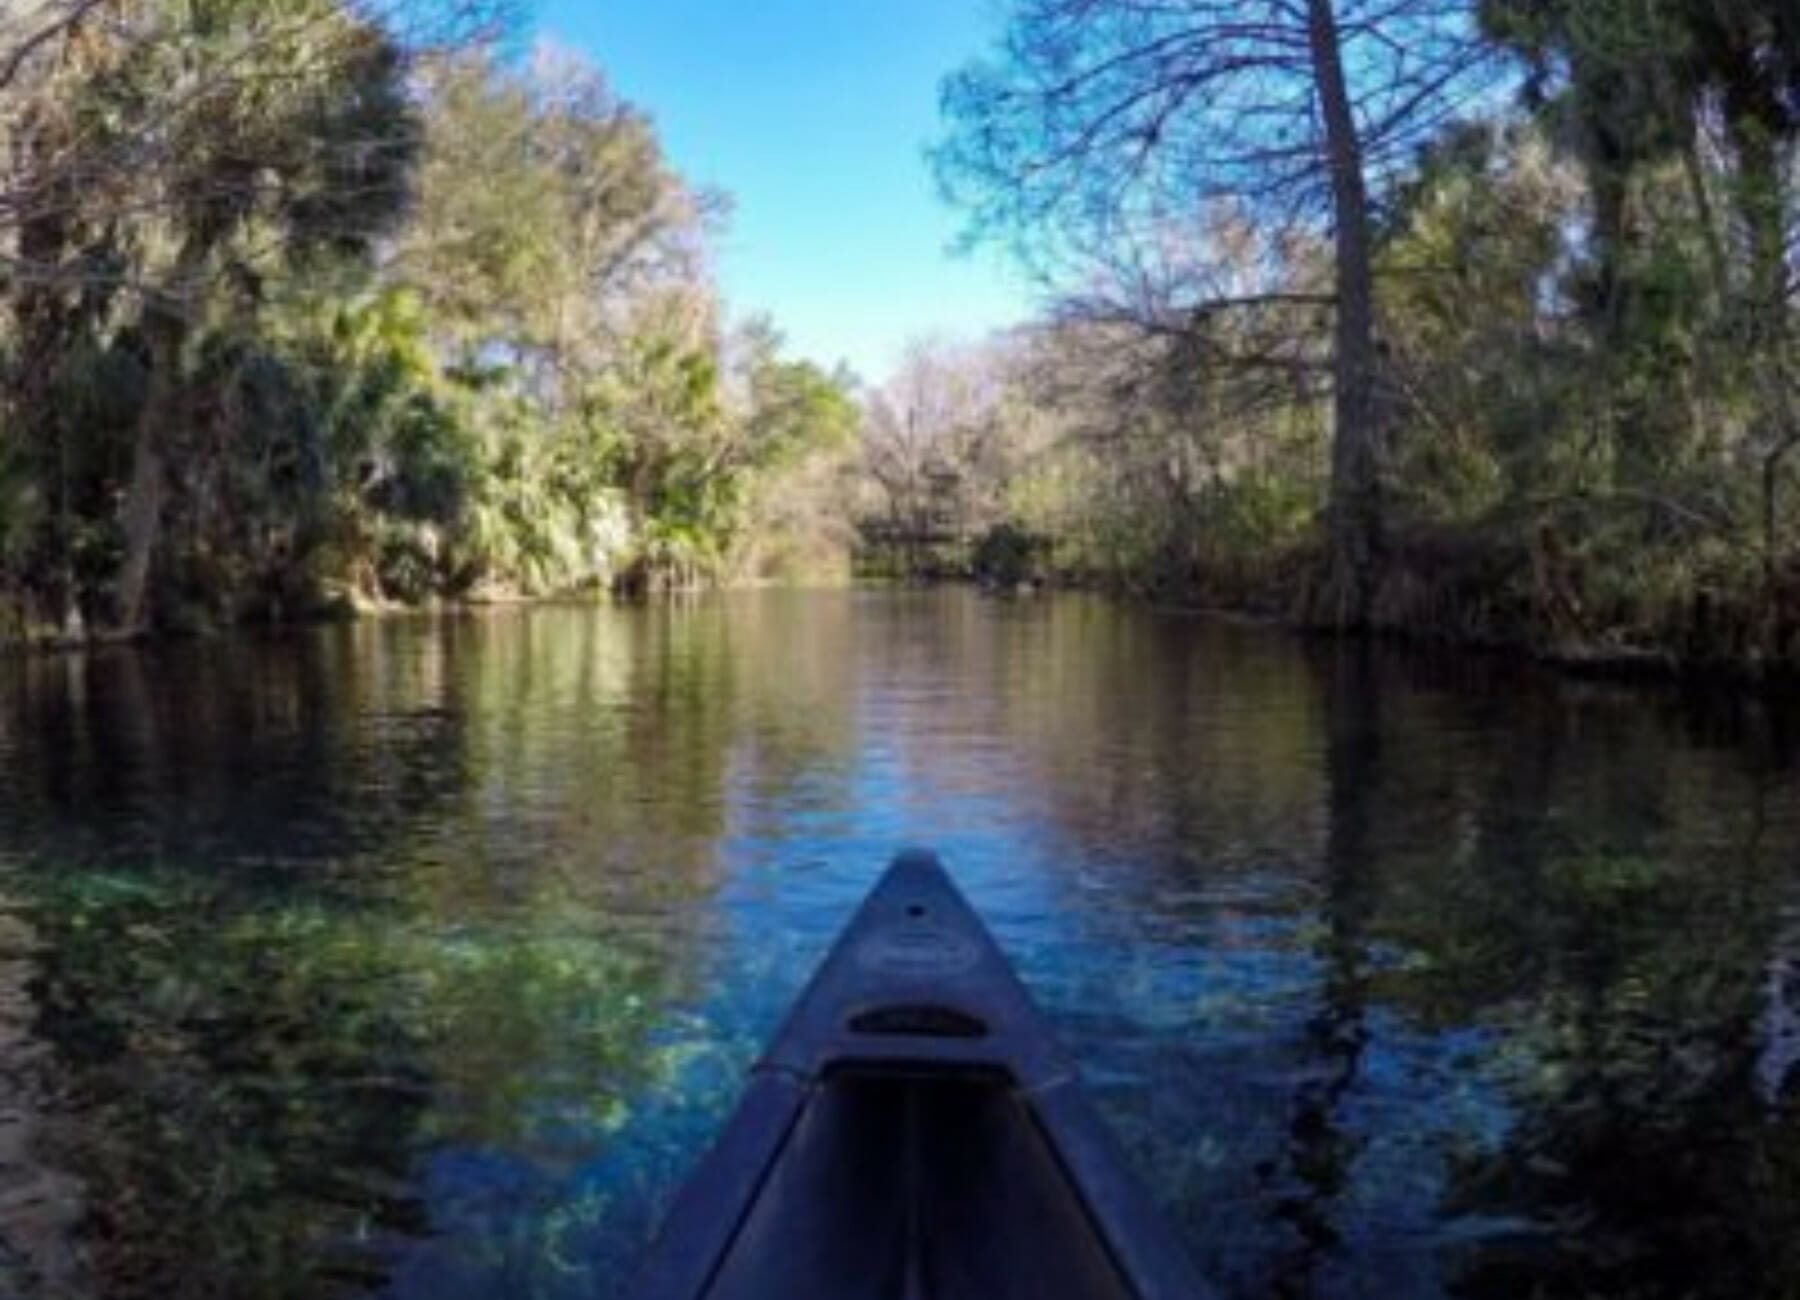 21 Breathtaking Natural Springs In Florida - Beyond The Tent